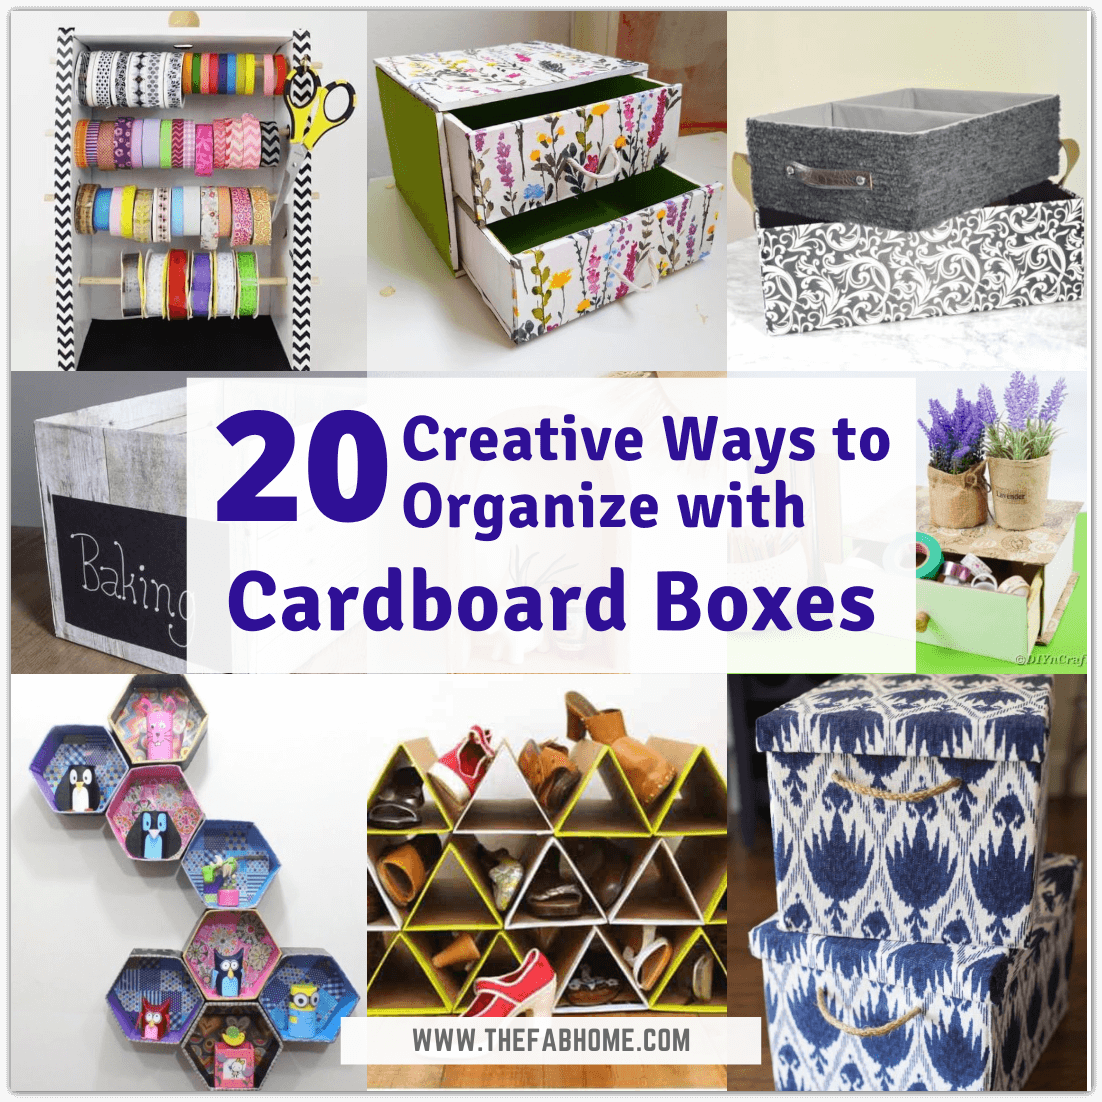 How to make organizer boxes with cardboard and lined with fabric